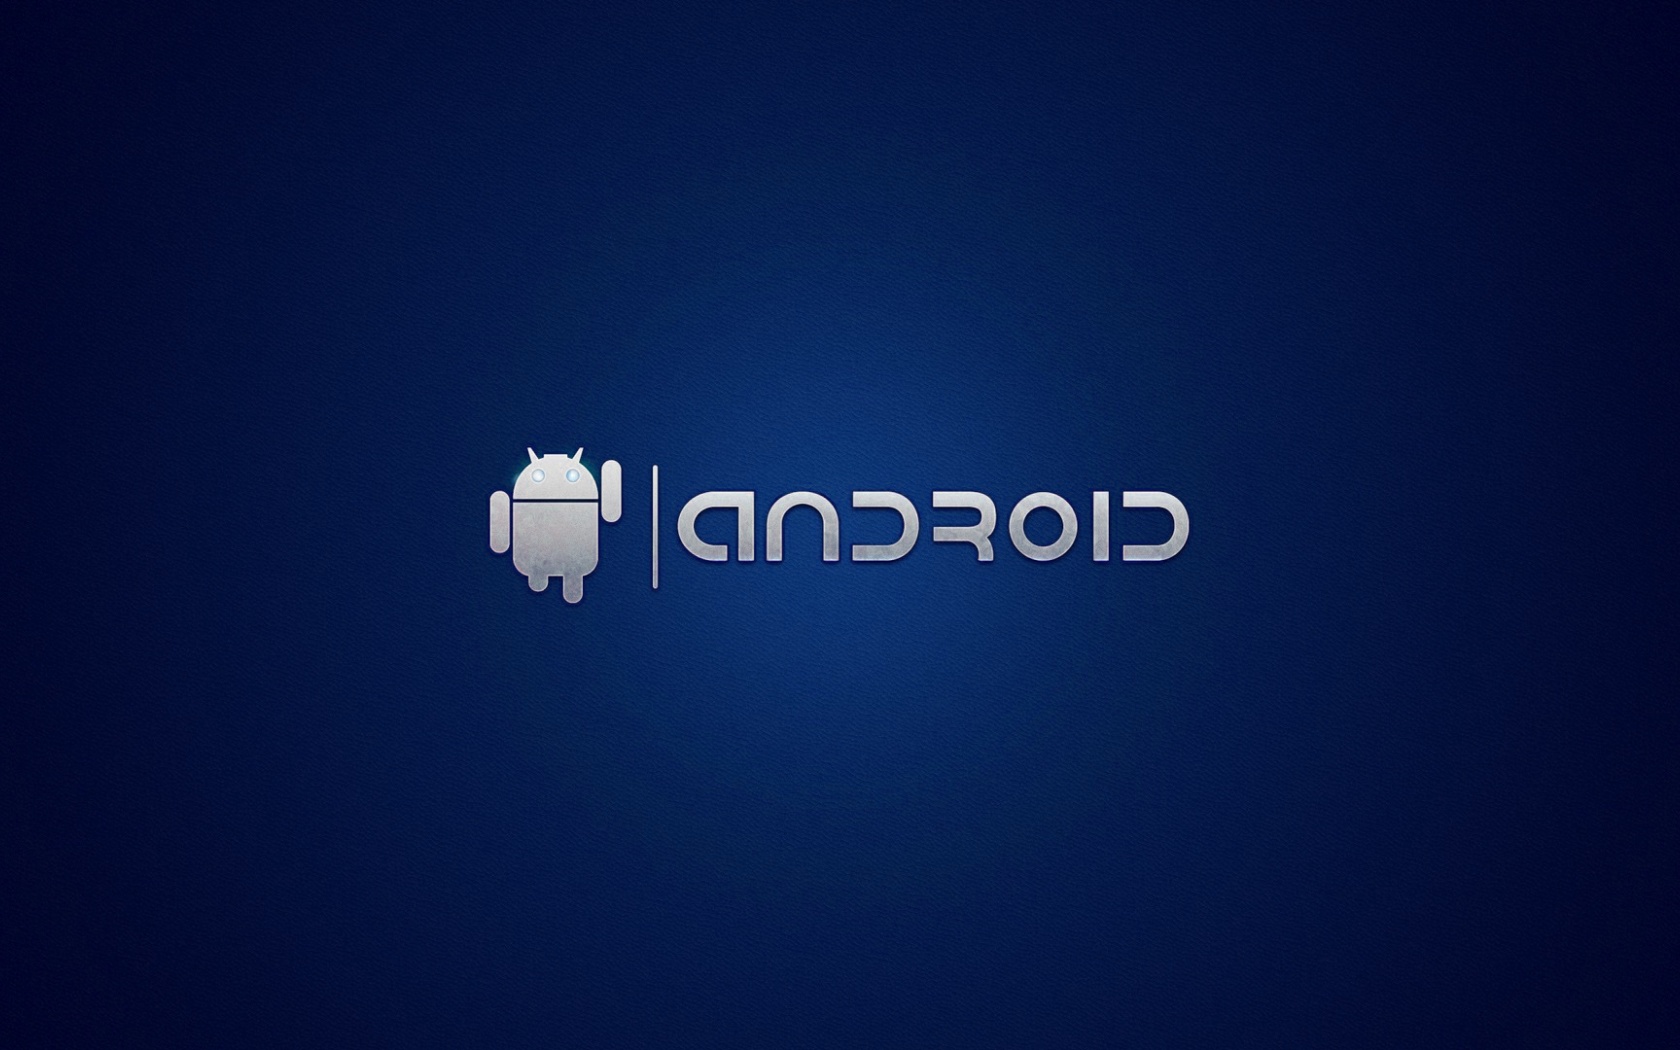 Android On Blue Desktop Pc And Mac Wallpaper